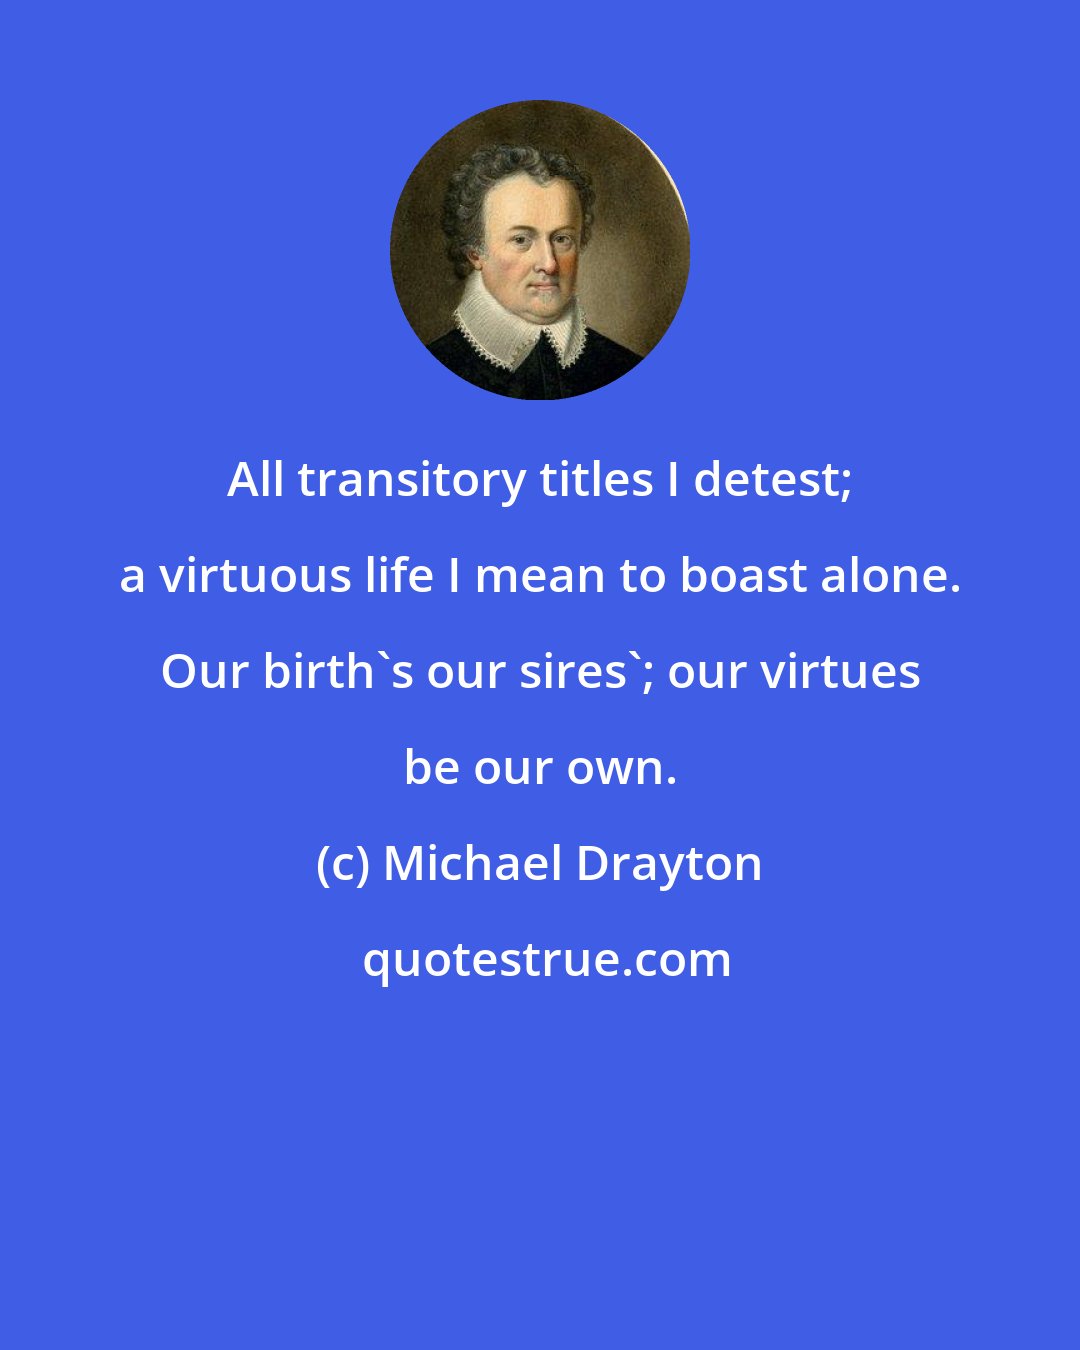 Michael Drayton: All transitory titles I detest; a virtuous life I mean to boast alone. Our birth's our sires'; our virtues be our own.